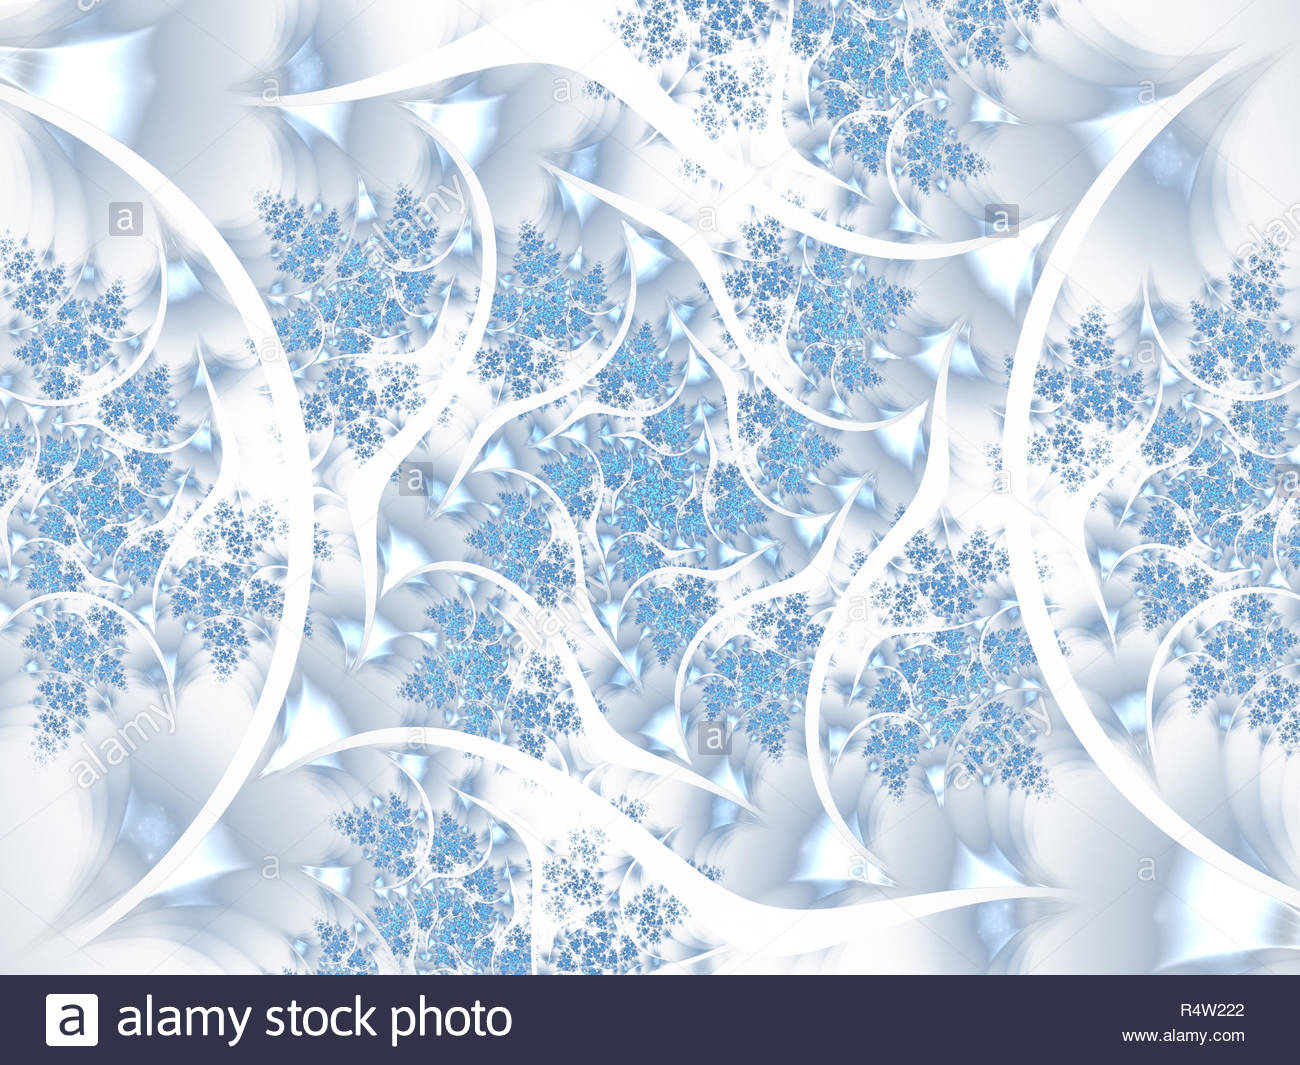 Fractal Snow Flakes Winter Background With Snowflakes Forming